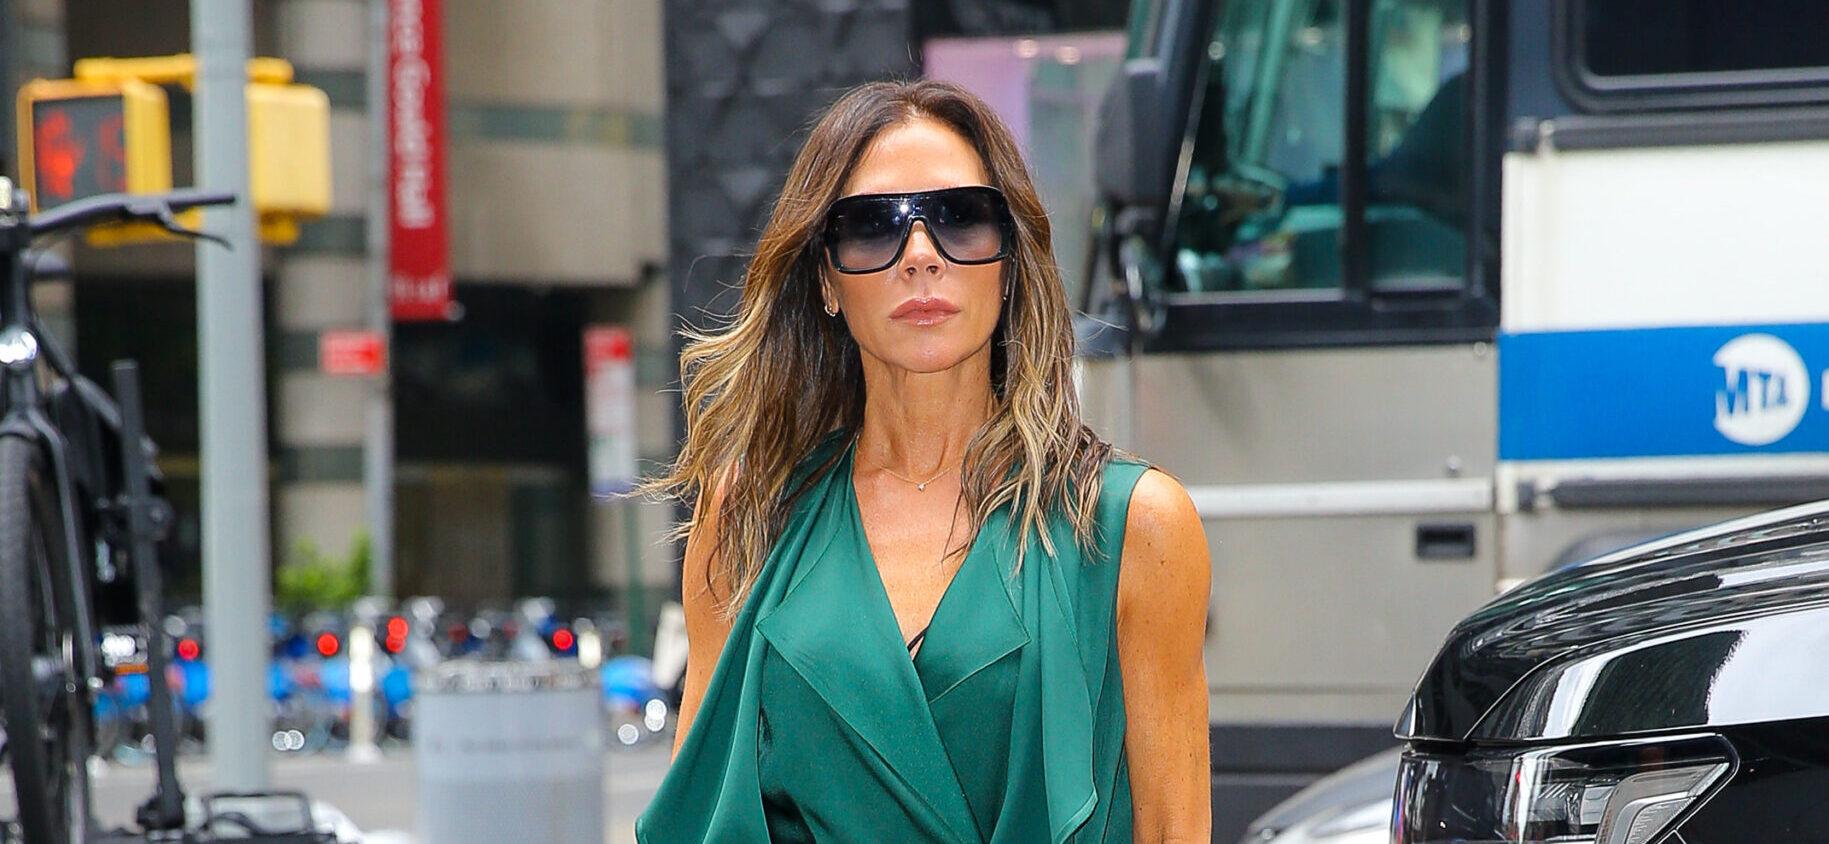 Victoria Beckham Gives Fans A Glimpse At Her Fitness & Beauty Regimen That Keeps Her Youthful At 48